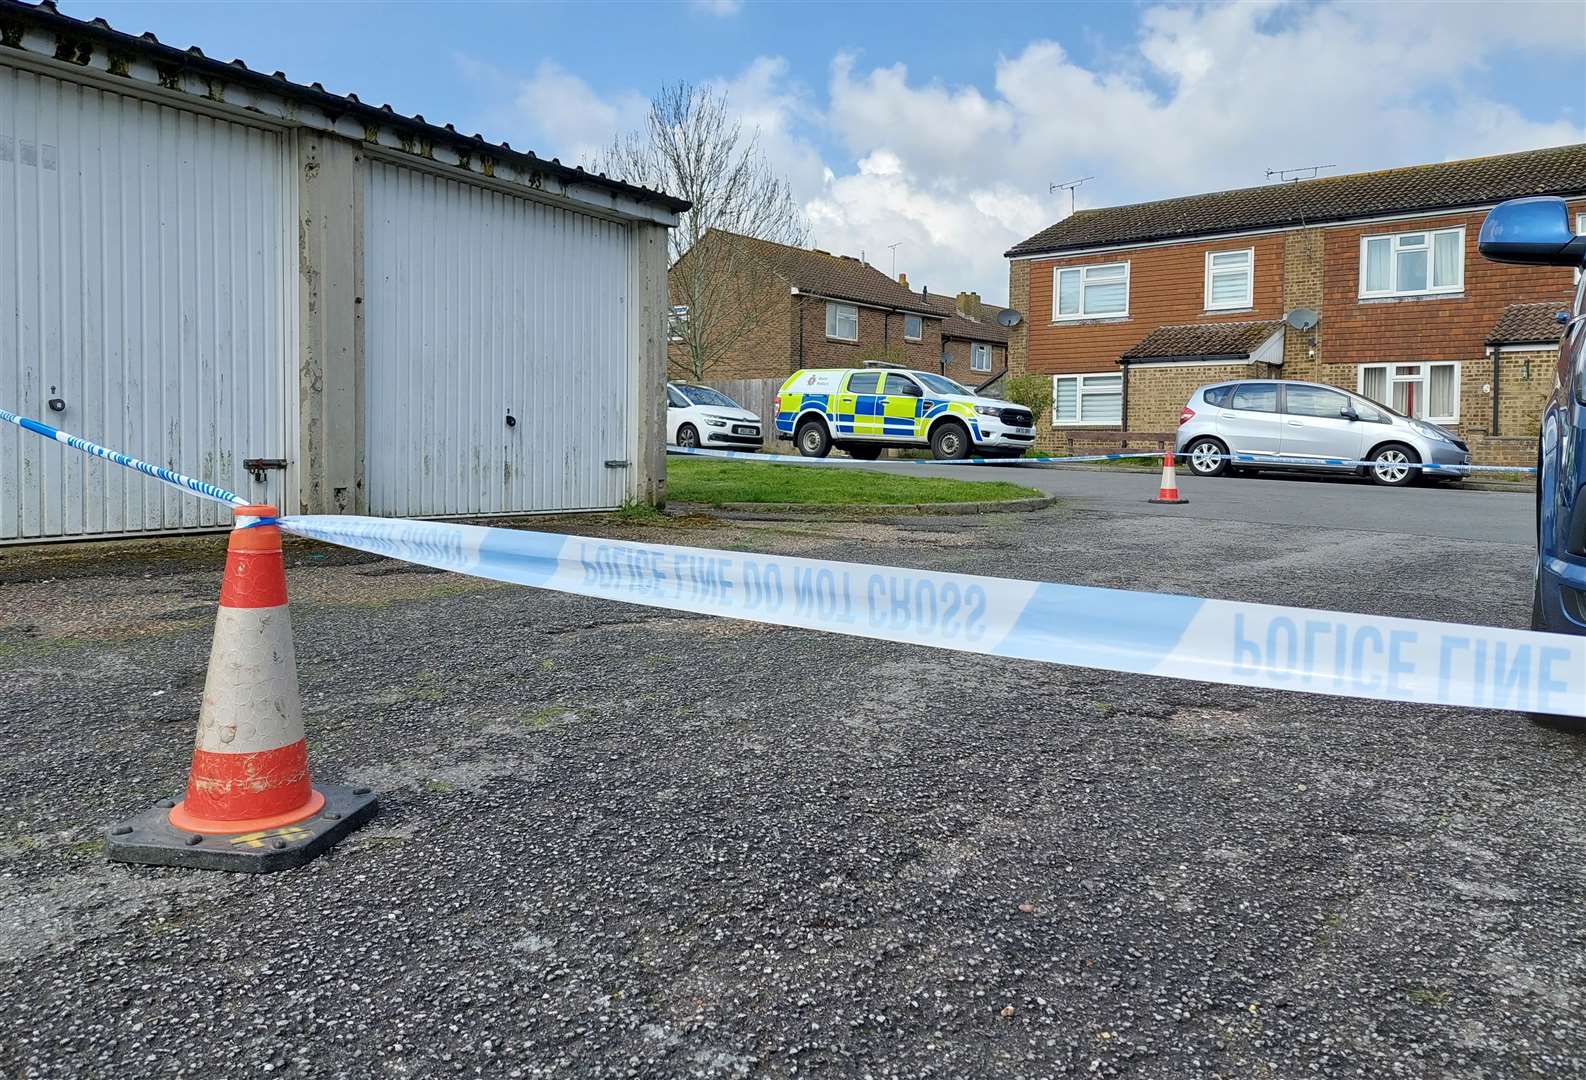 Police taped off a block of garages and part of an alleyway in Beecholme Drive